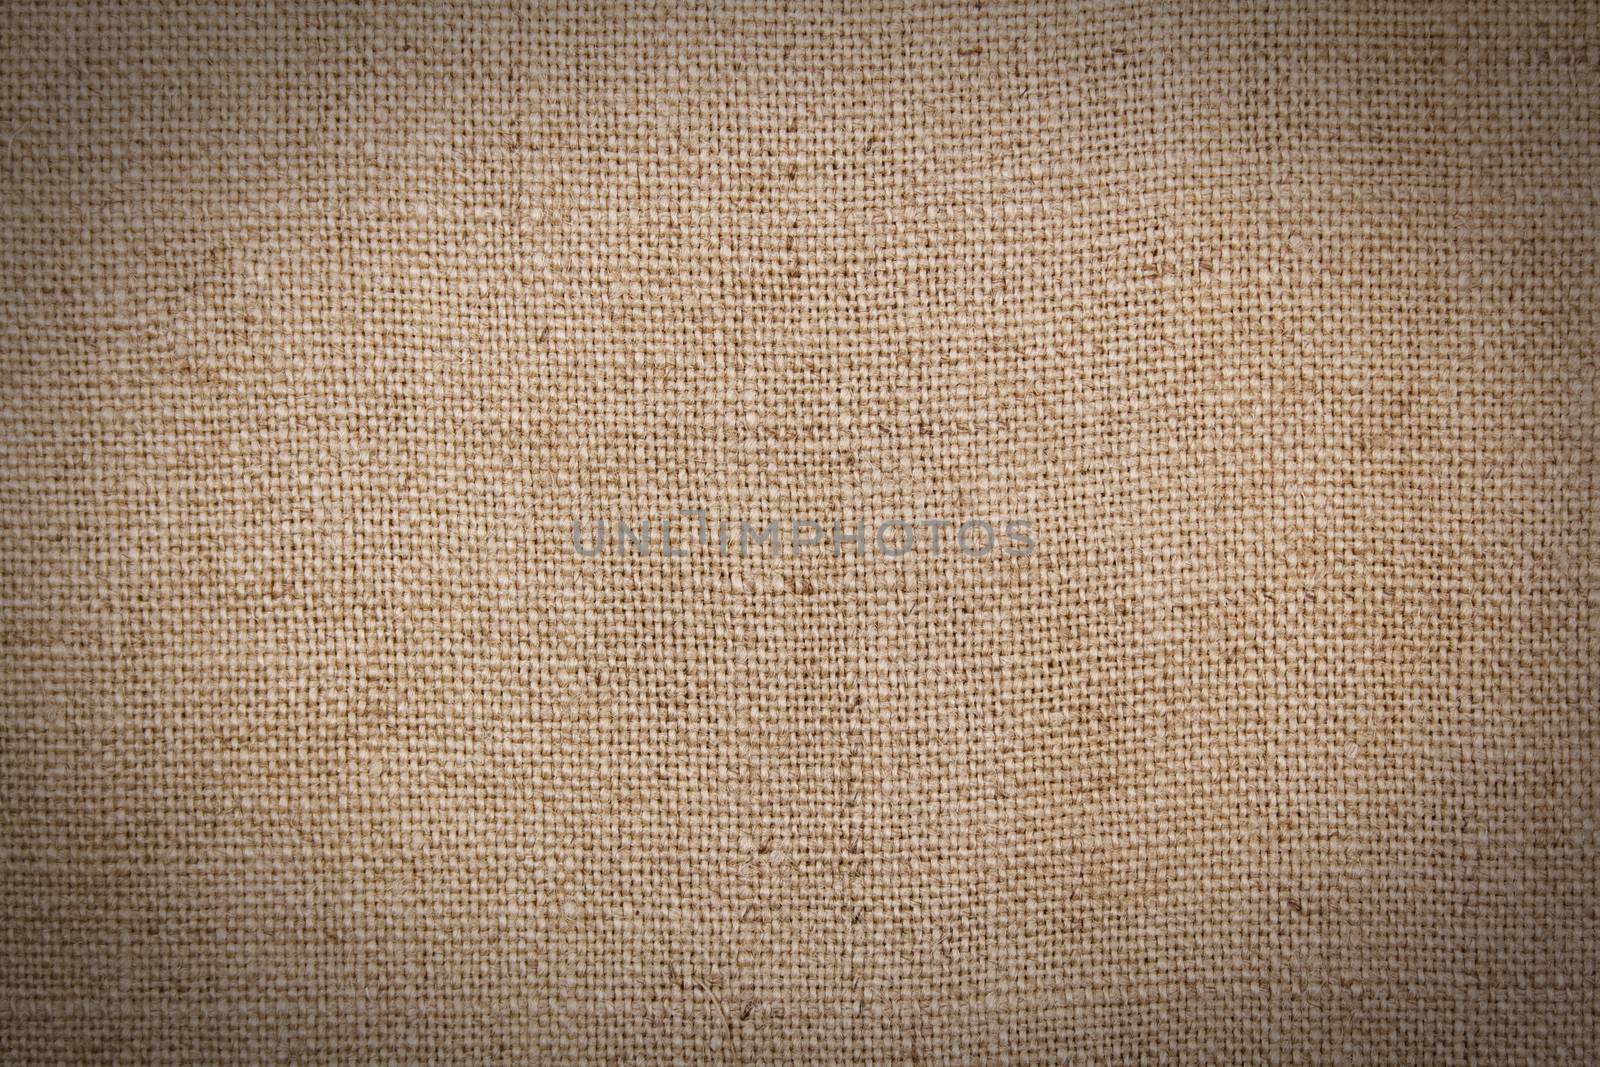 Burlap or sacking texture for the background by Irina1977